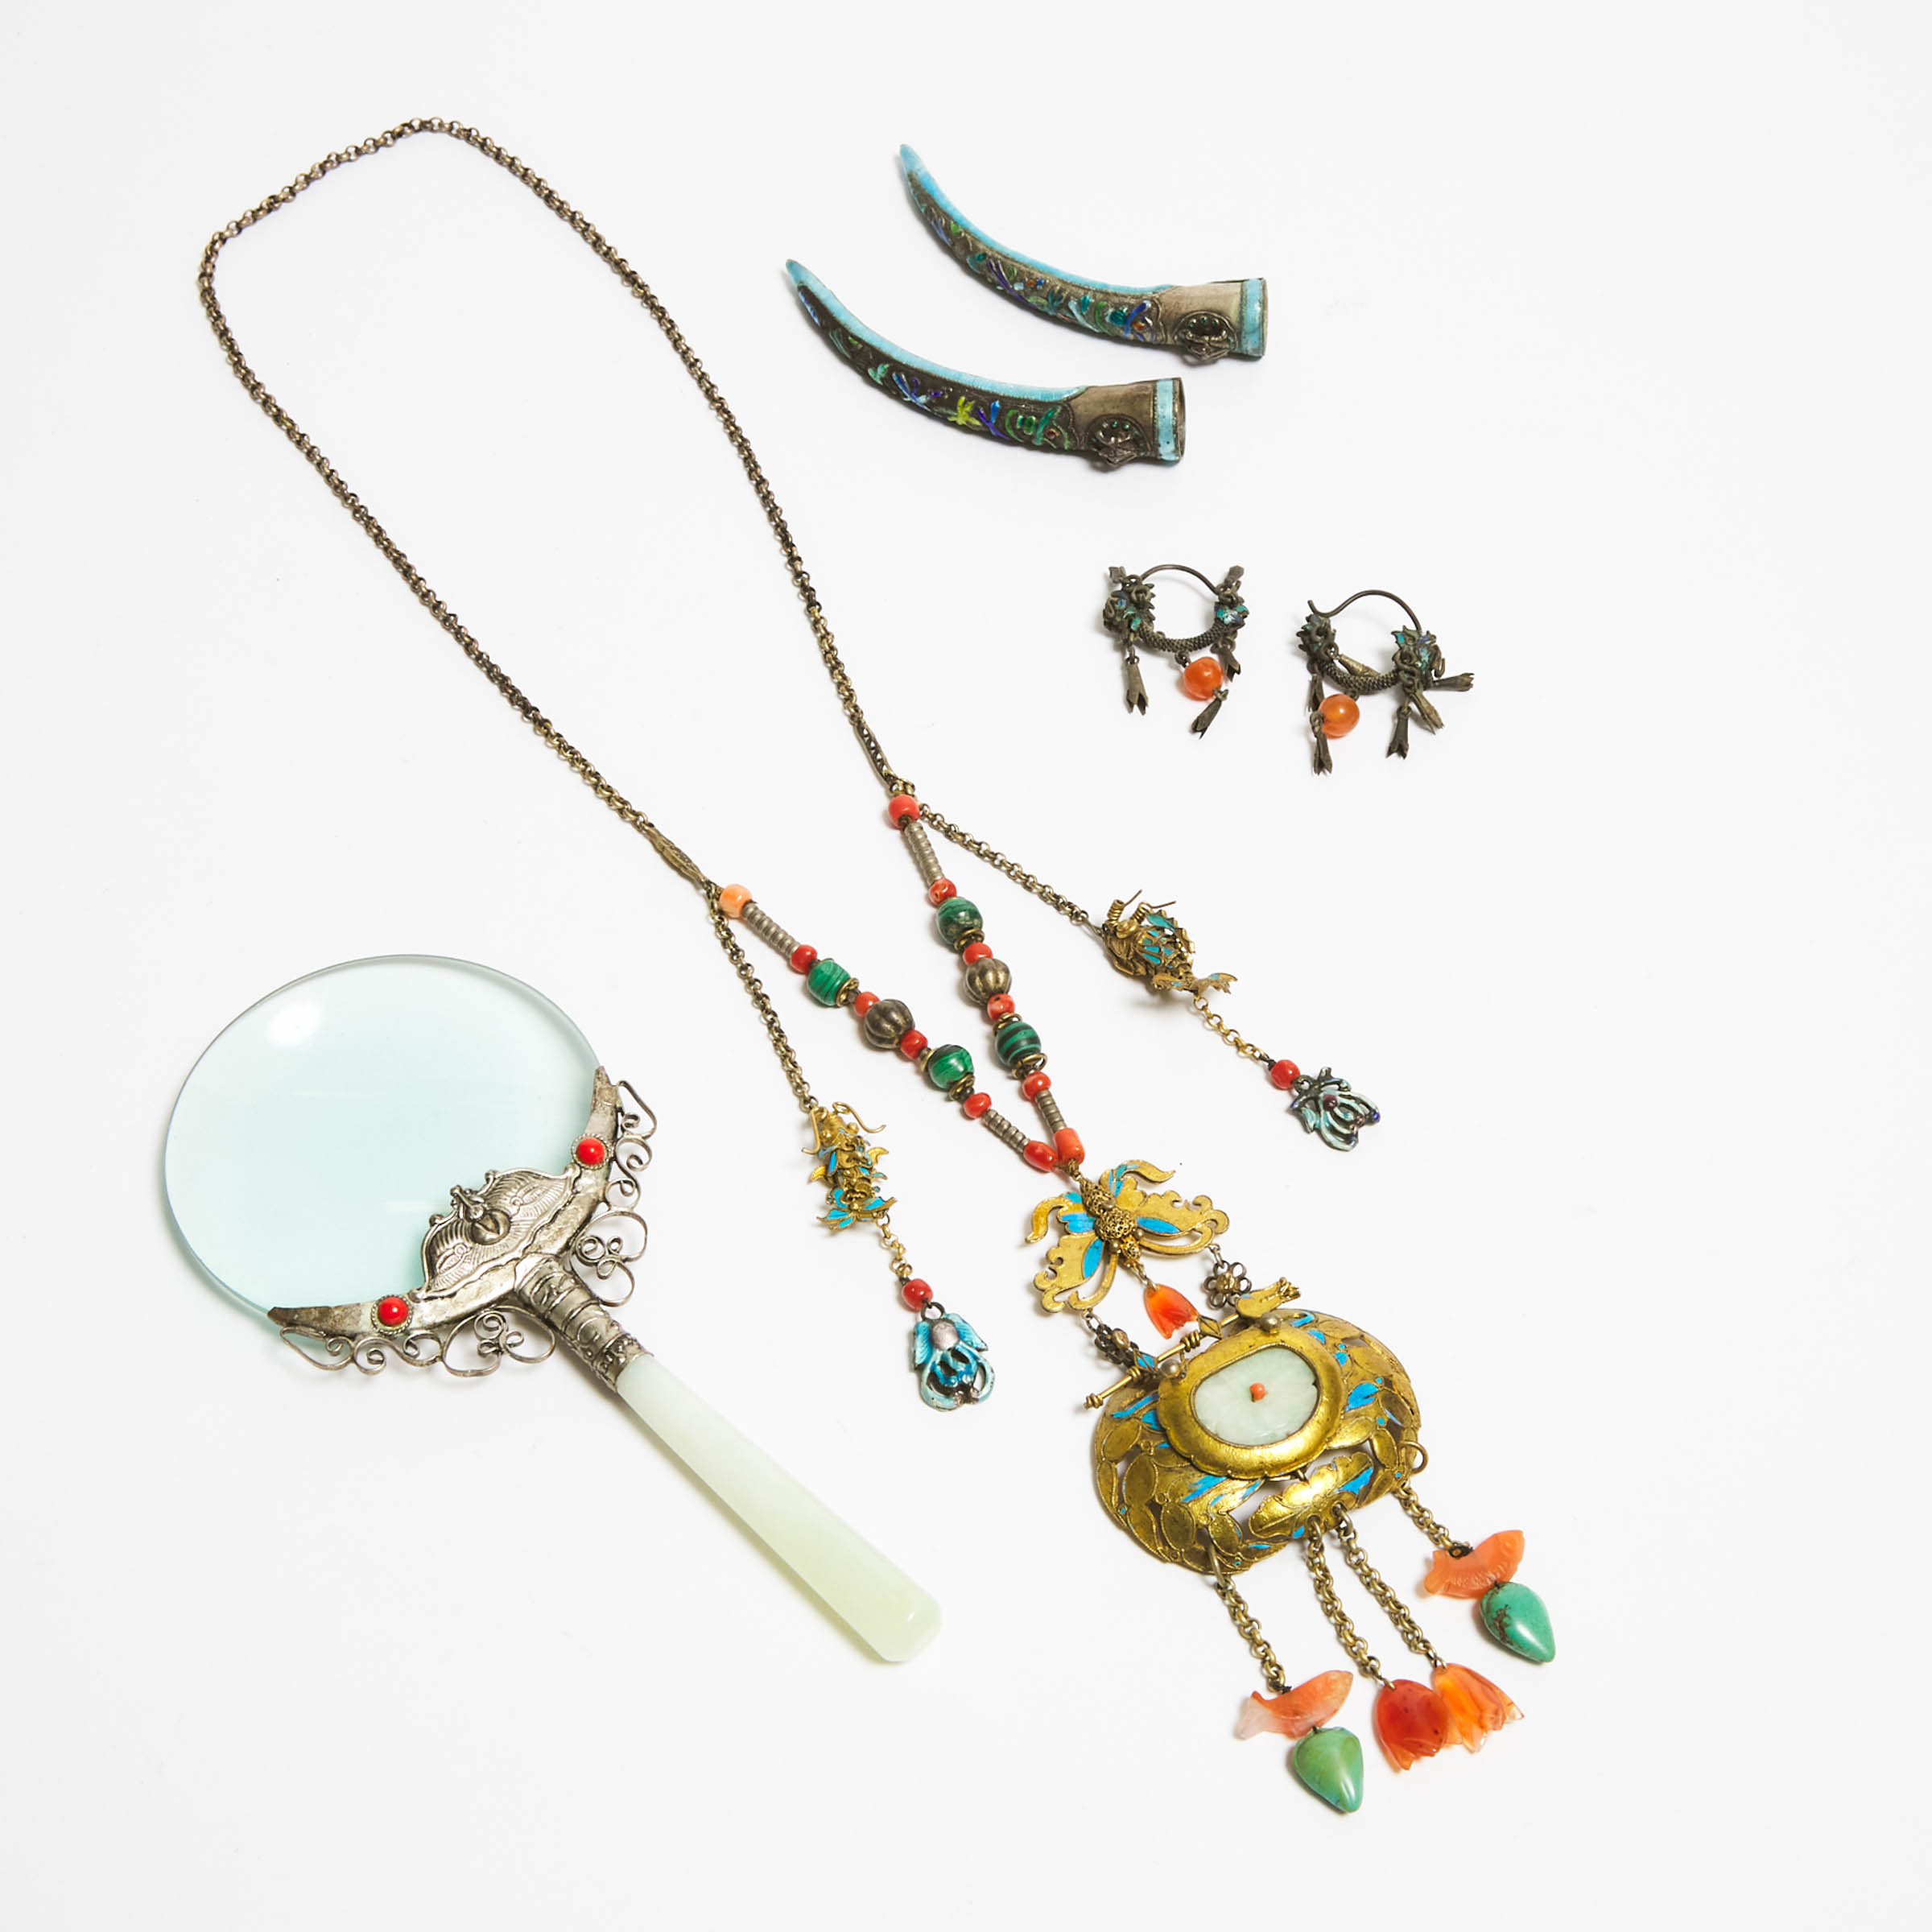 A Group of Six Filigree and Enamel Ornaments, Late Qing/Republican Period